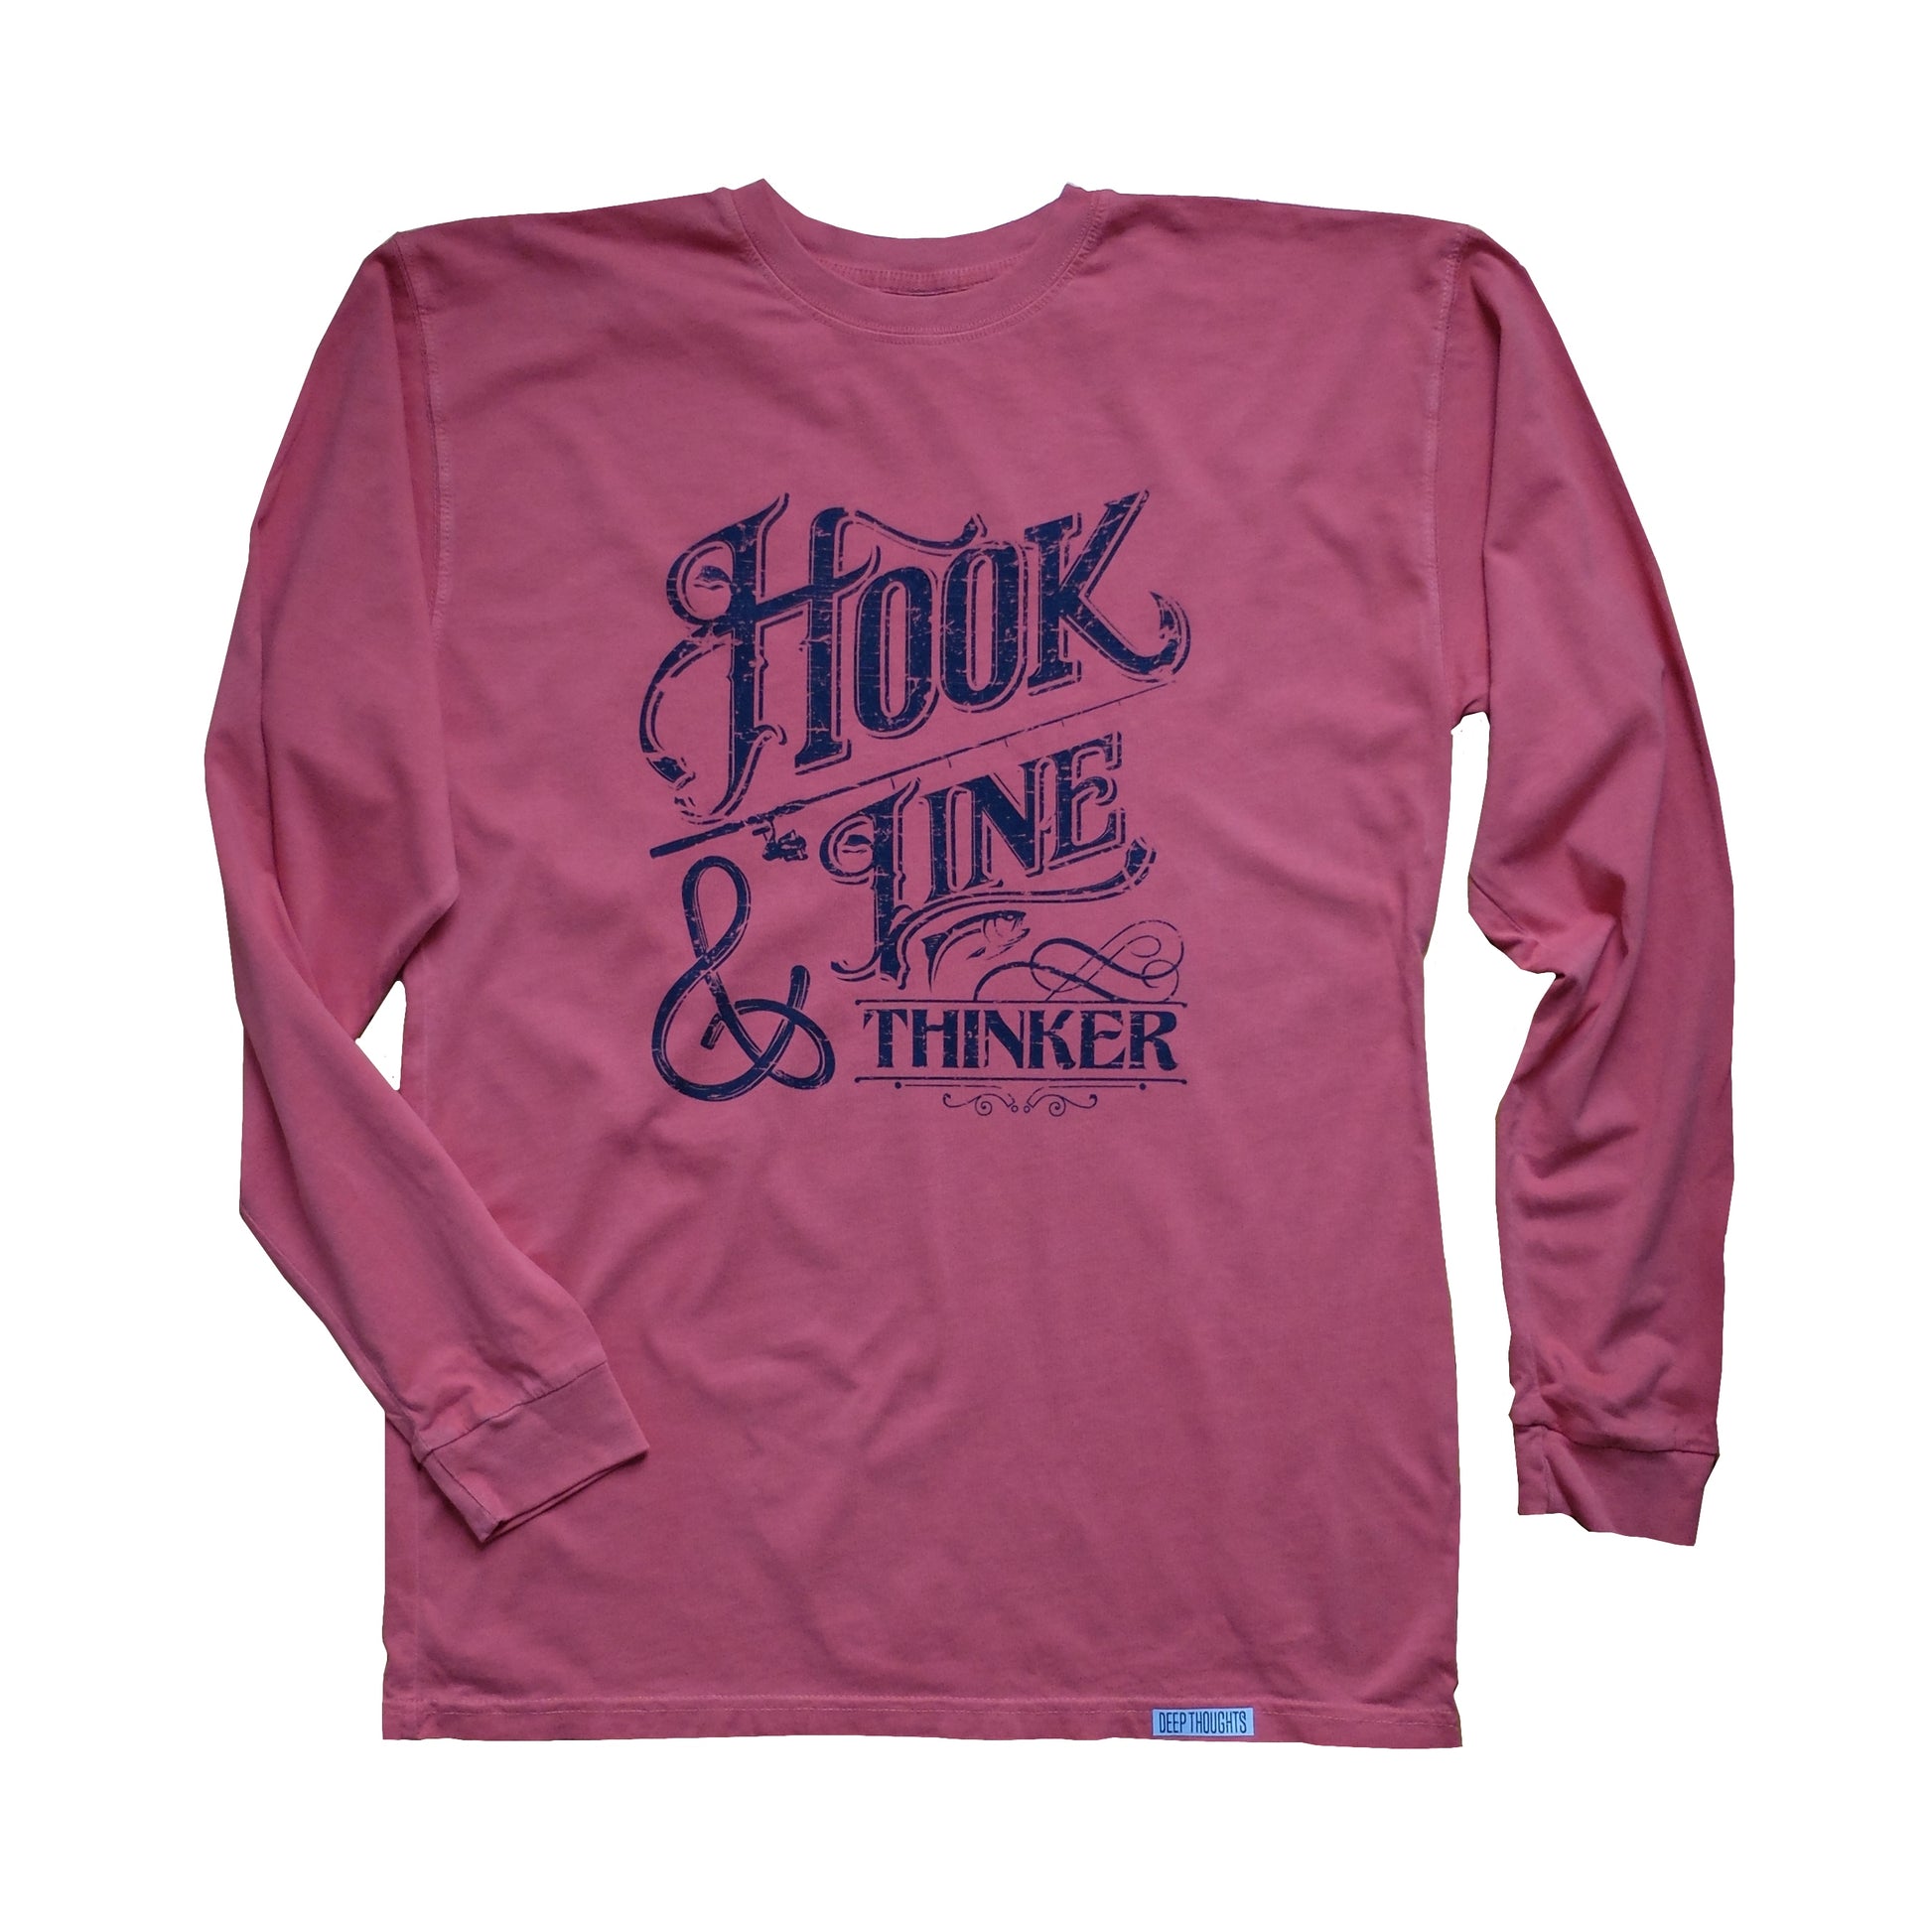 long sleeve washed red t-shirt with navy Hook Line and Thinker vintage style text